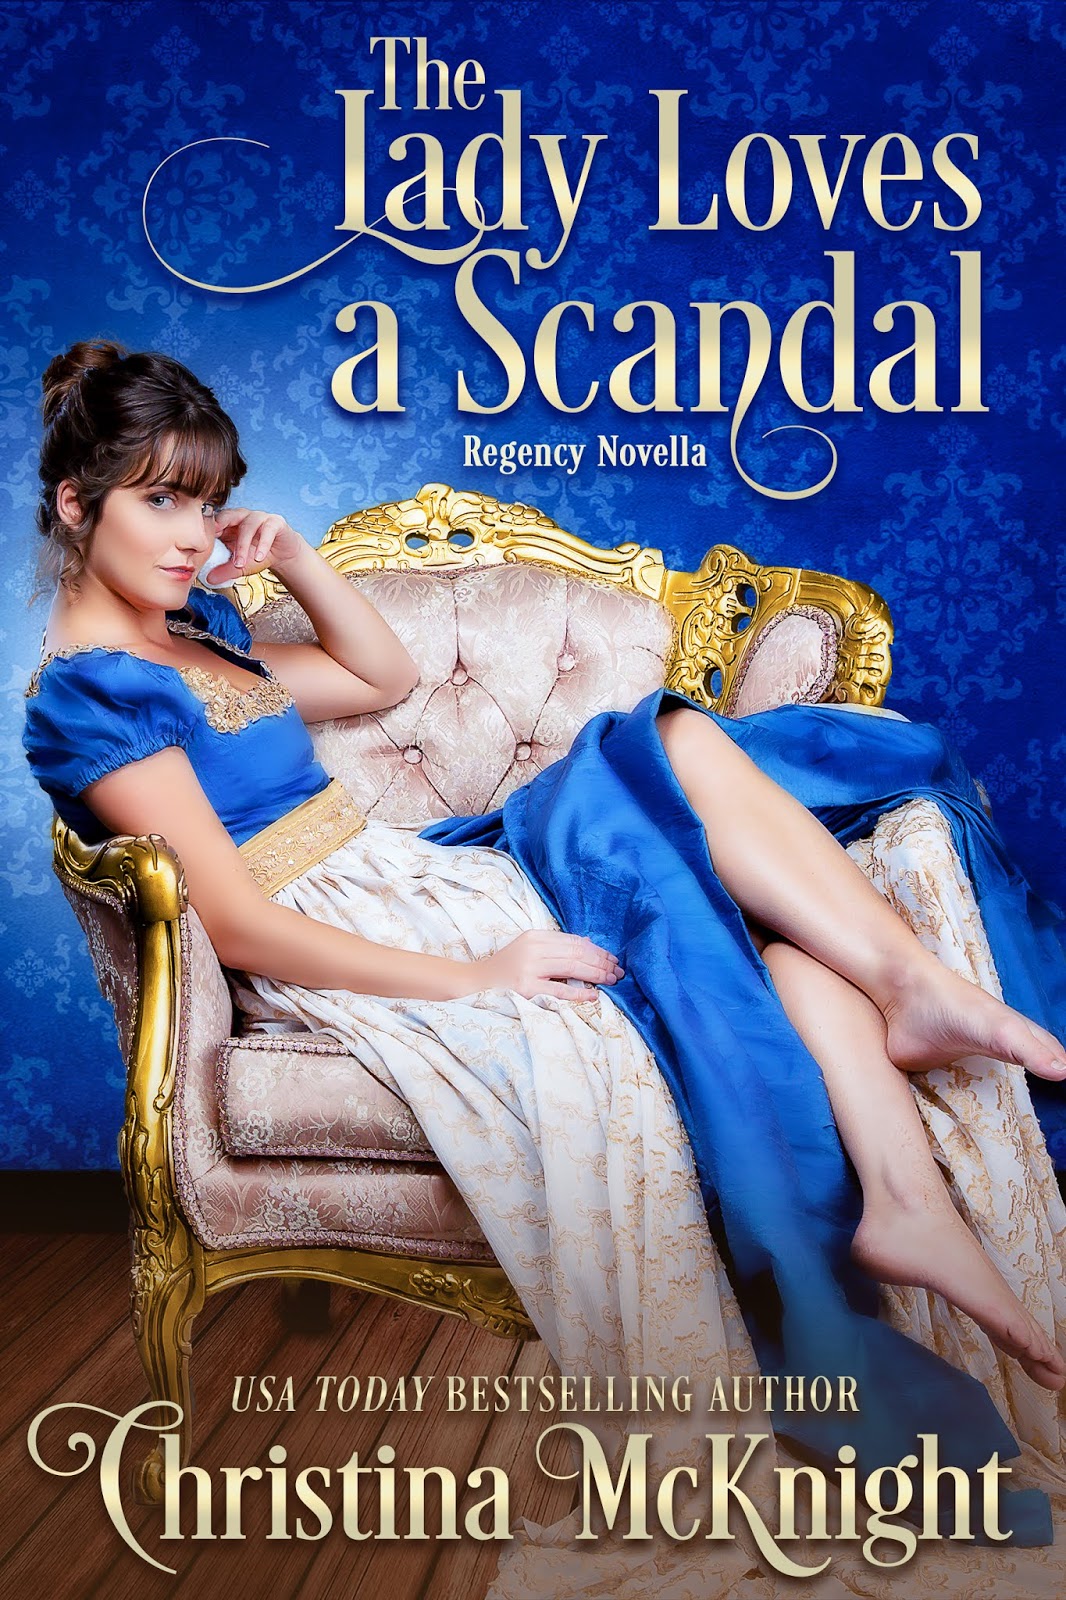 Book Review and Giveaway The Lady Loves a Scandal by Christina McKnight - NWoBS Blog